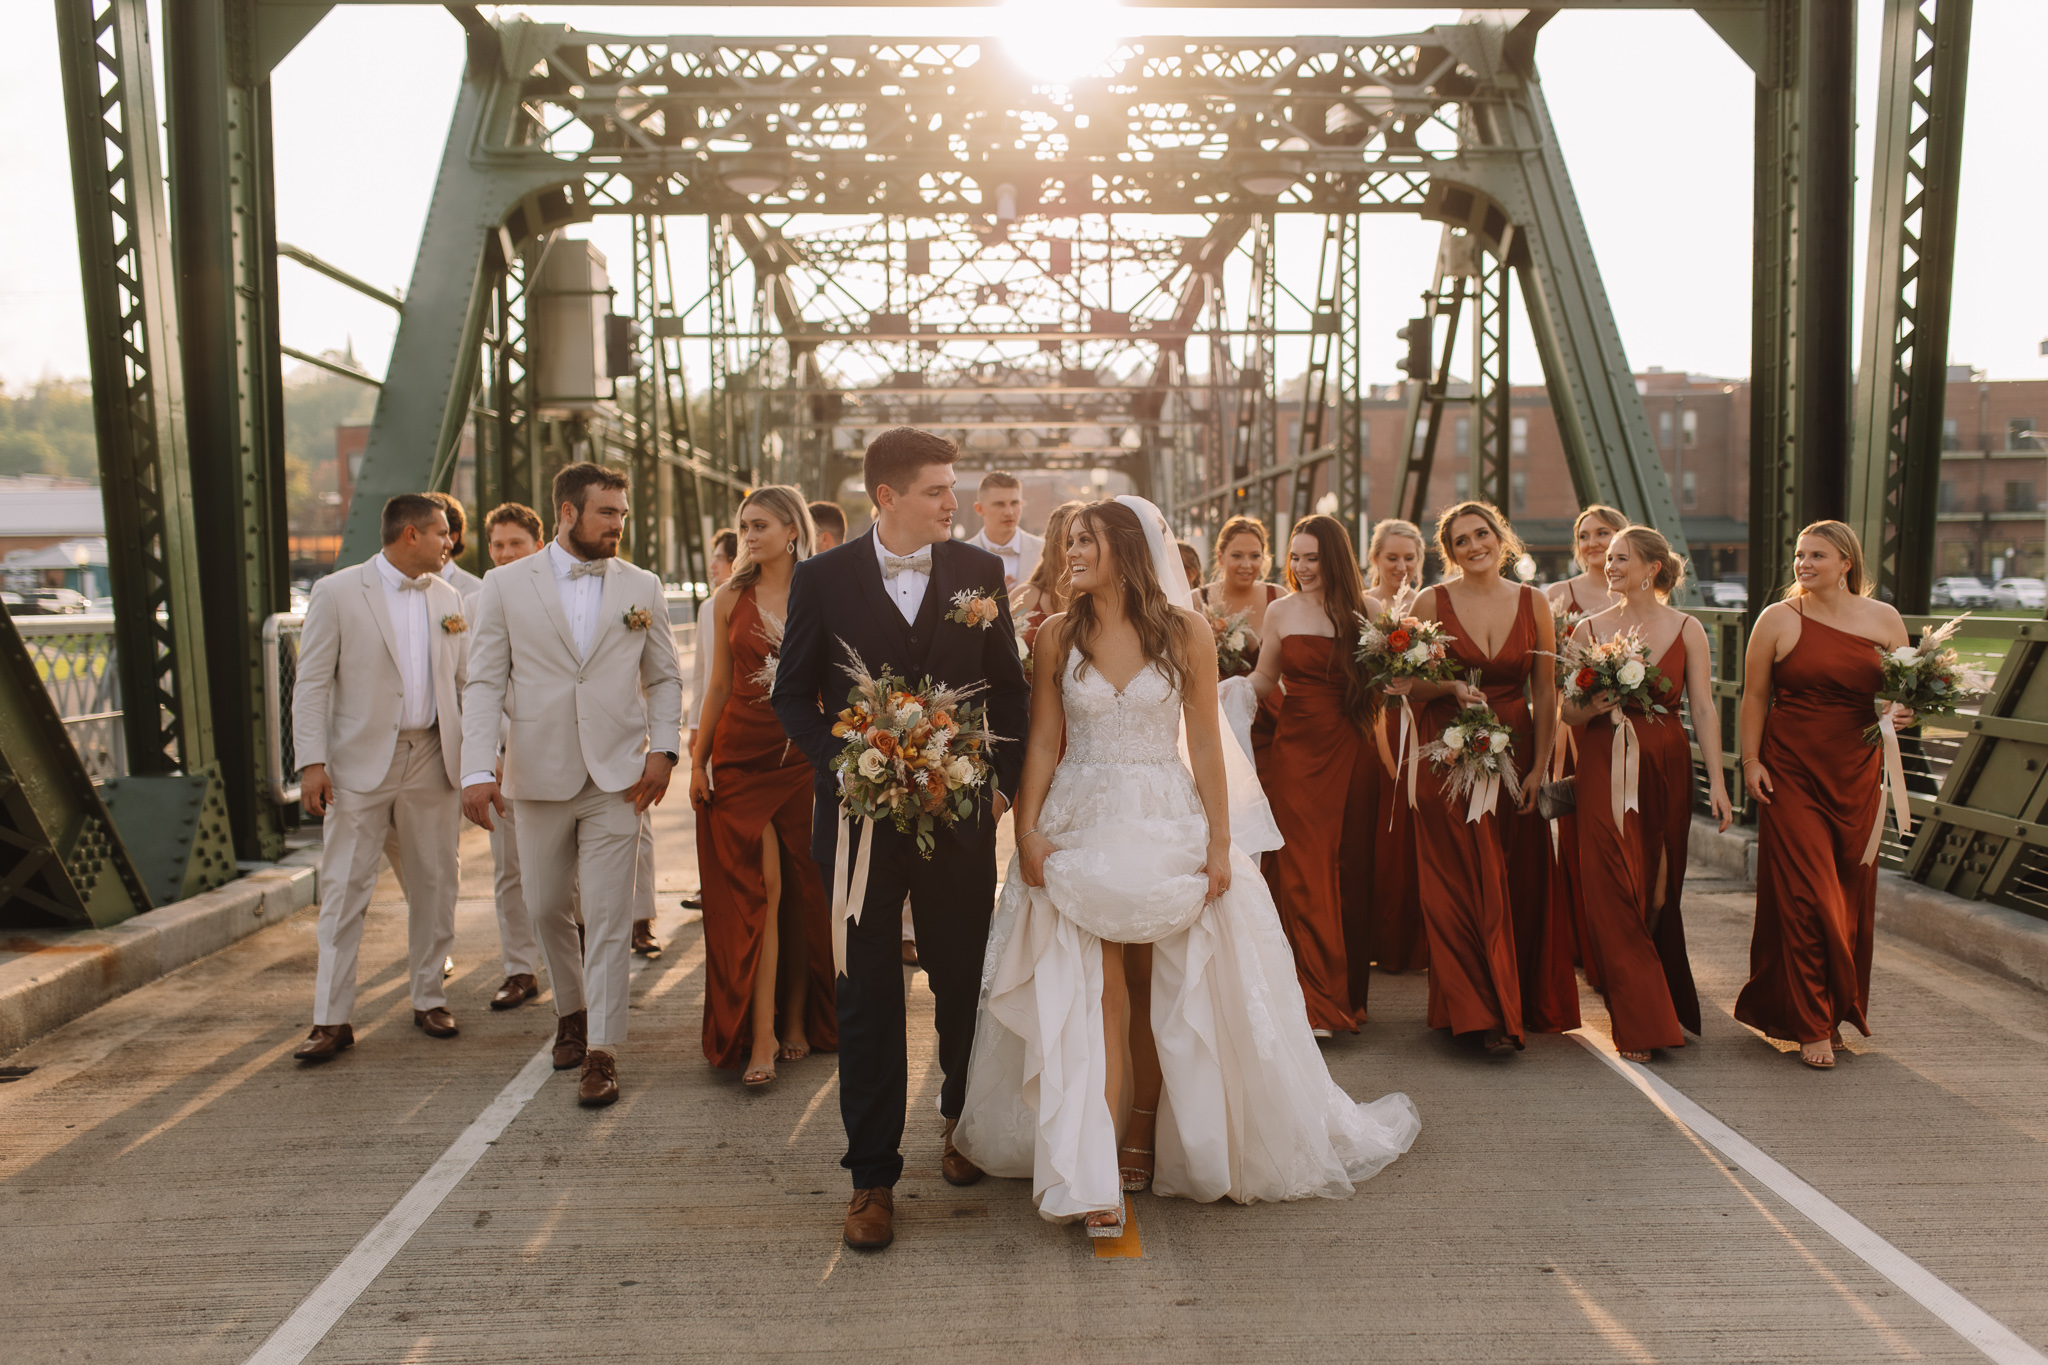 A bride and groom walking side by side under the Stillwater bridge in Minnesota with the bridal party following behind as the sun sets